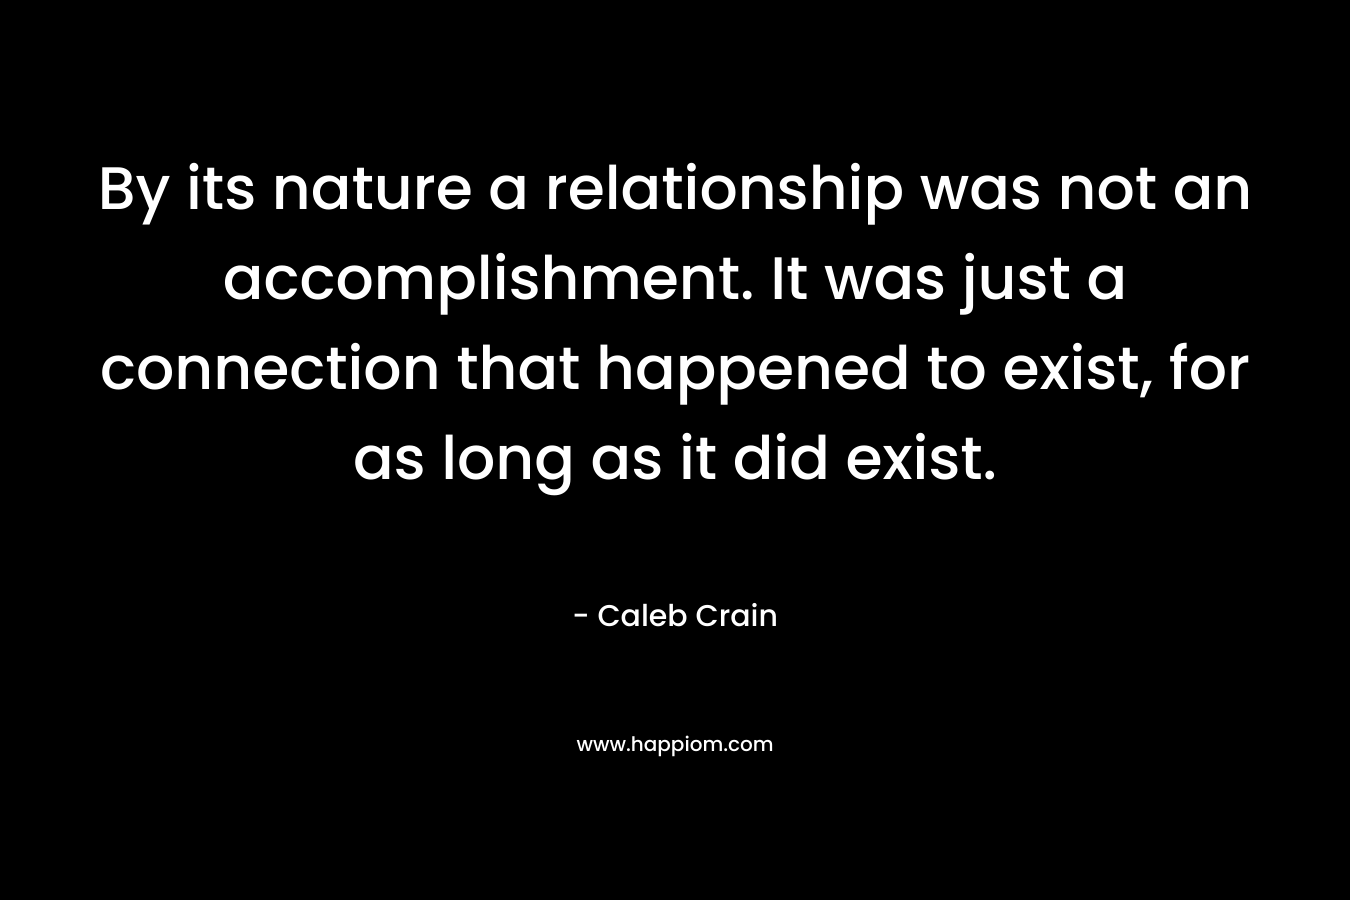 By its nature a relationship was not an accomplishment. It was just a connection that happened to exist, for as long as it did exist.